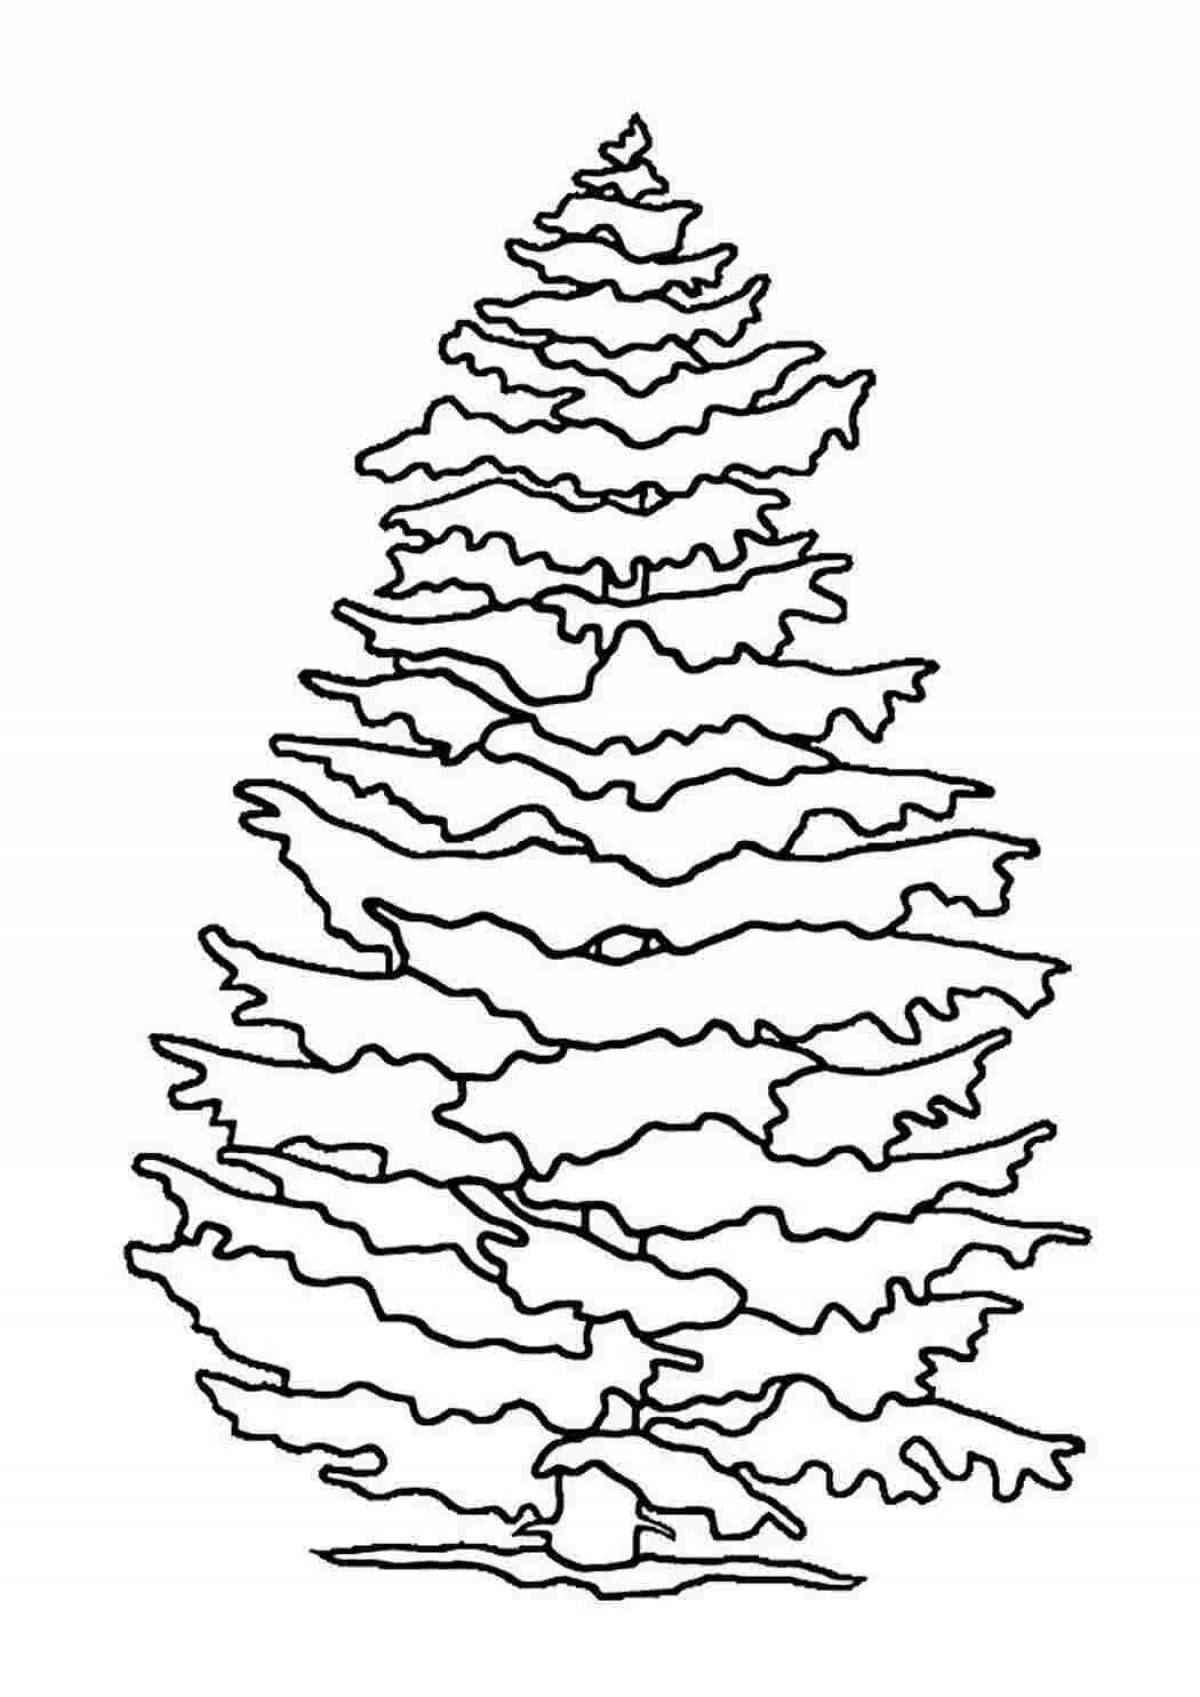 Coloring spruces for kids